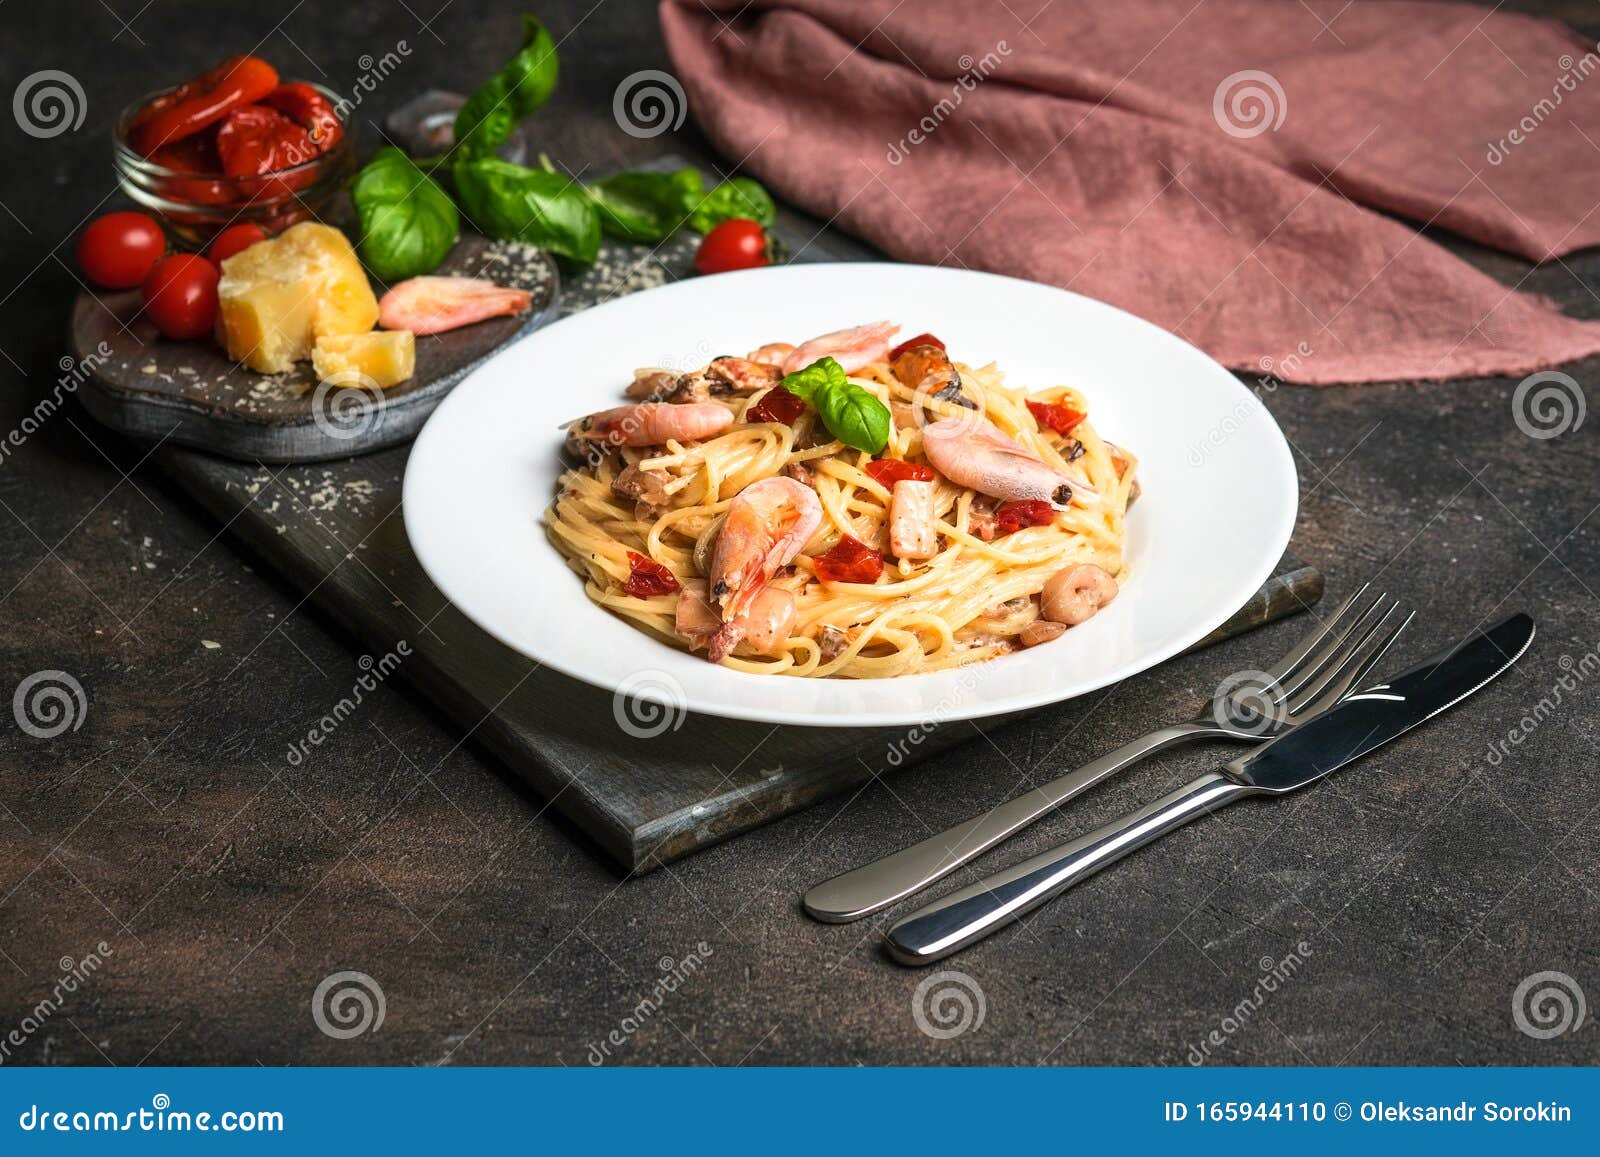 Seafood Pasta. a Plate of Spaghetti with Shrimp Stock Photo - Image of ...